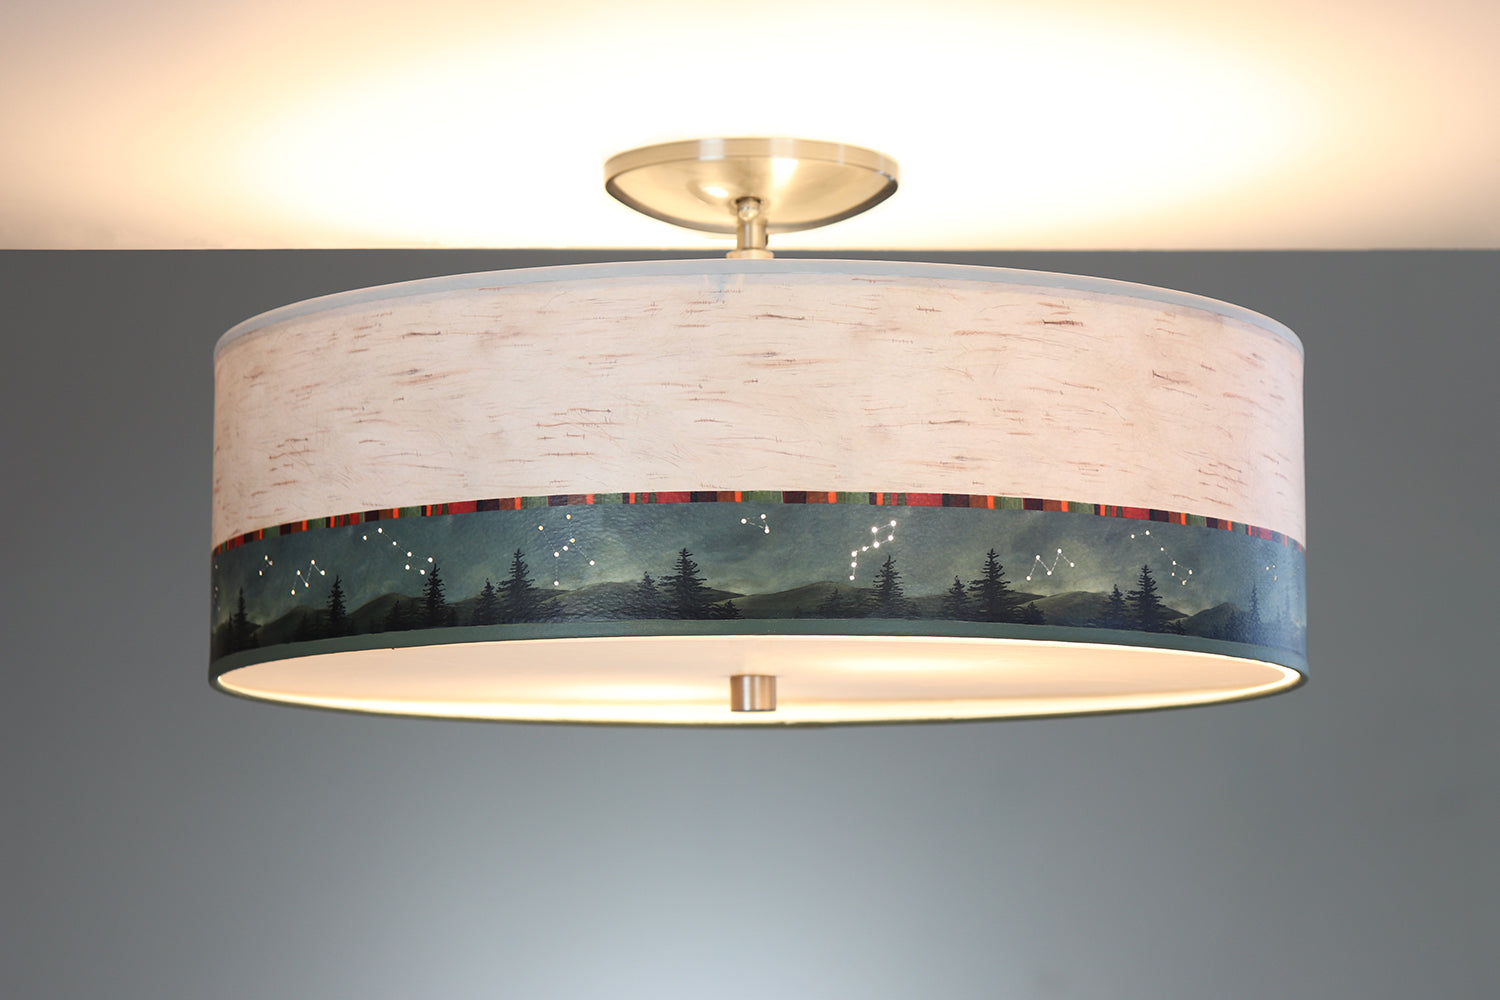 Janna Ugone & Co Ceiling Fixture 16" / Raw Brass Ceiling Lamp in Birch Midnight